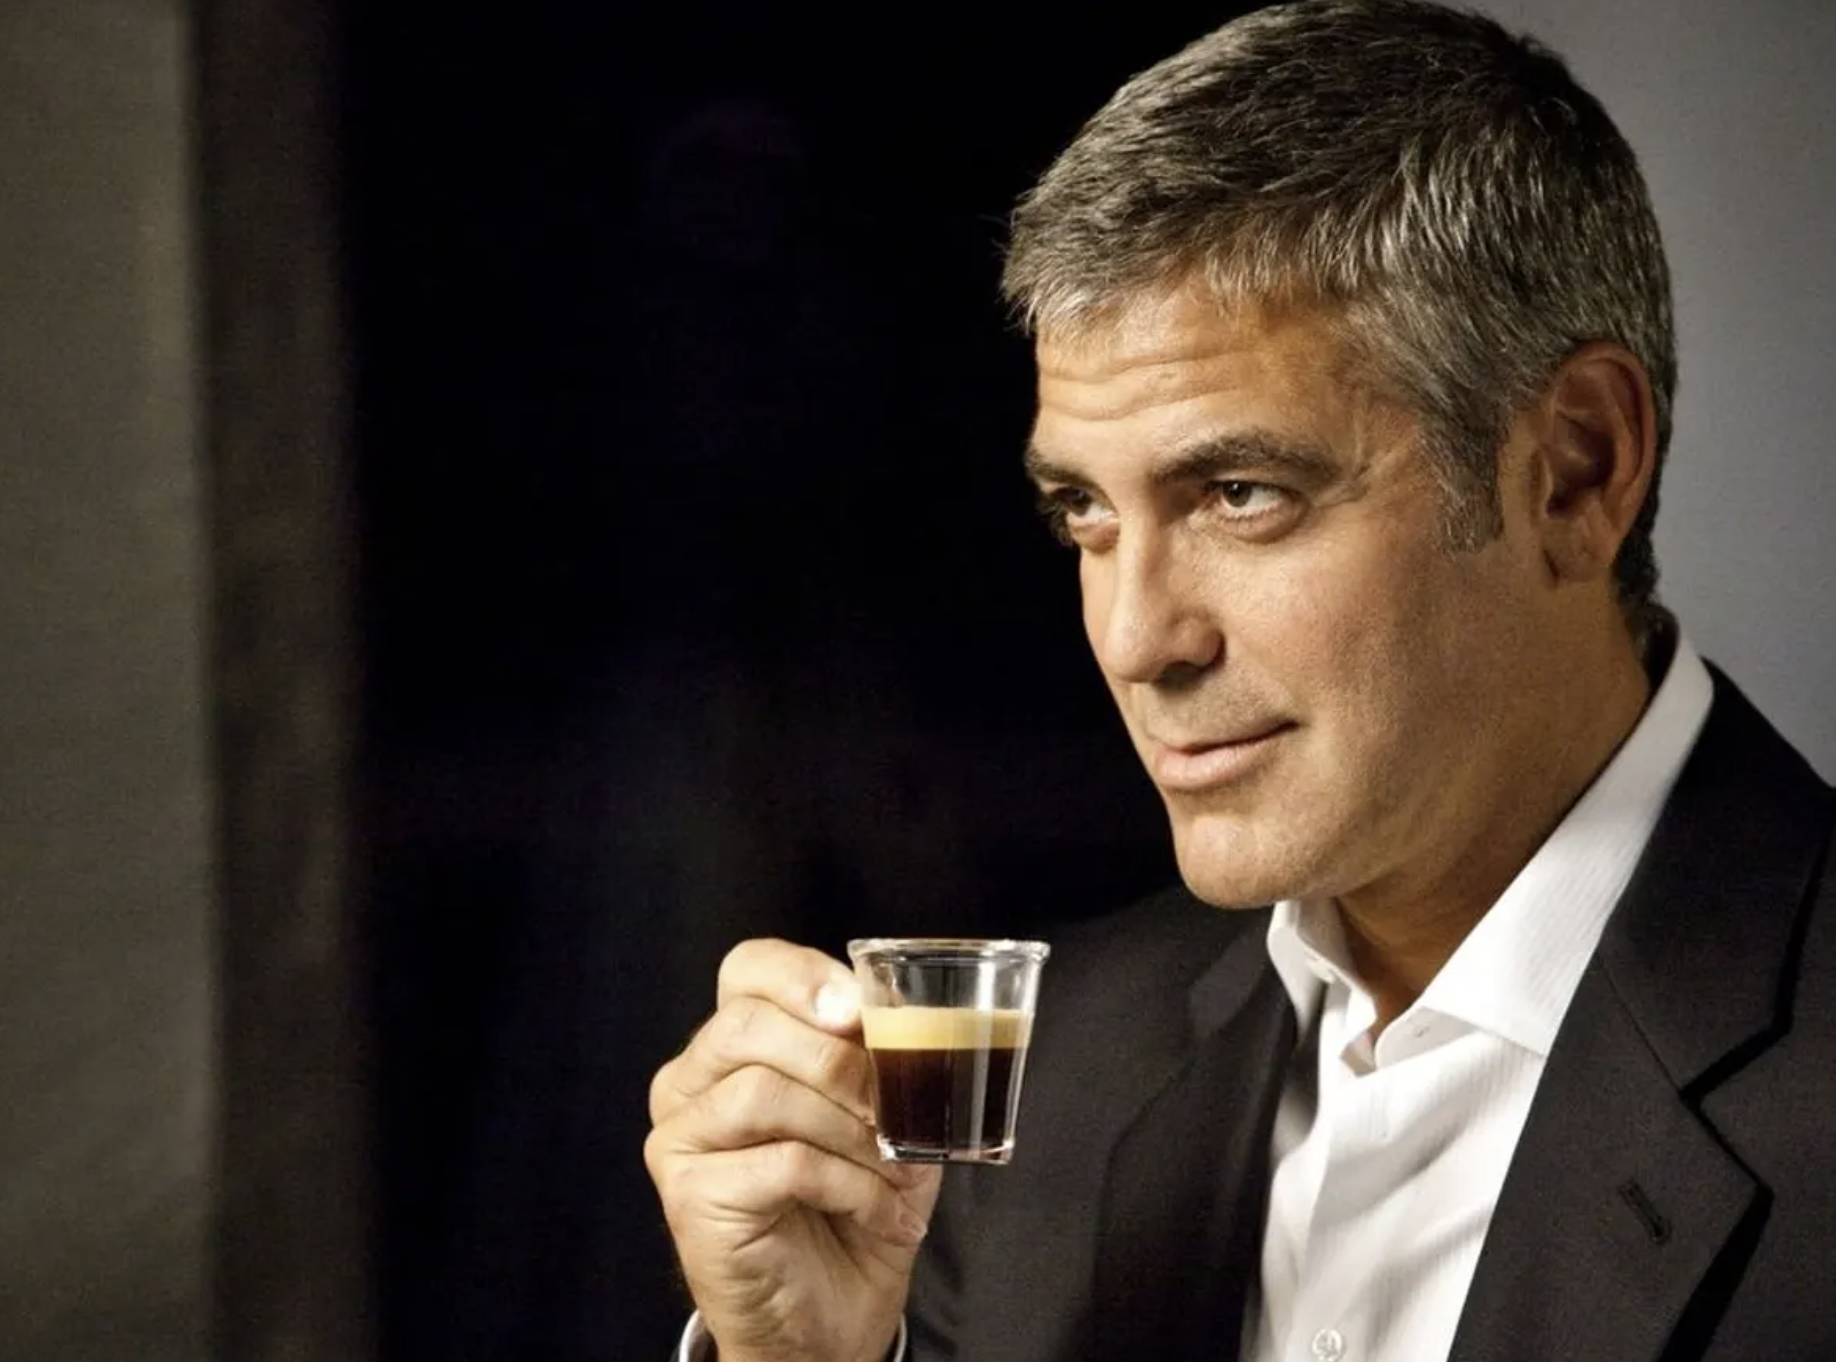 George Clooney holds an espresso shot in a small glass, which he holds up to his face as he looks off mysteriously